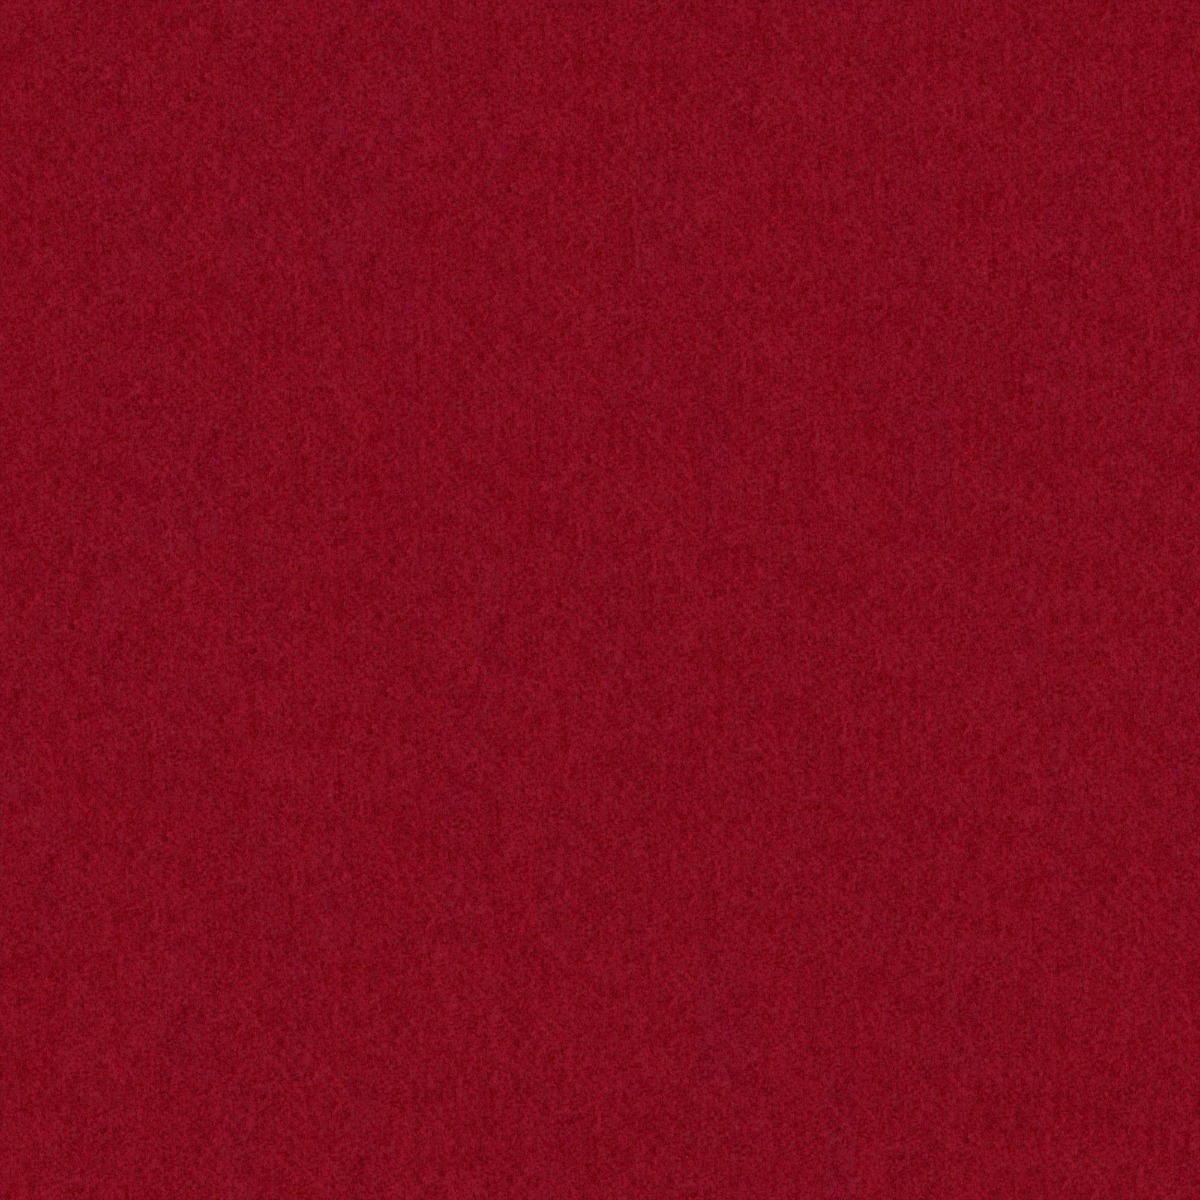 A seamless fabric texture with plain red flat units arranged in a None pattern